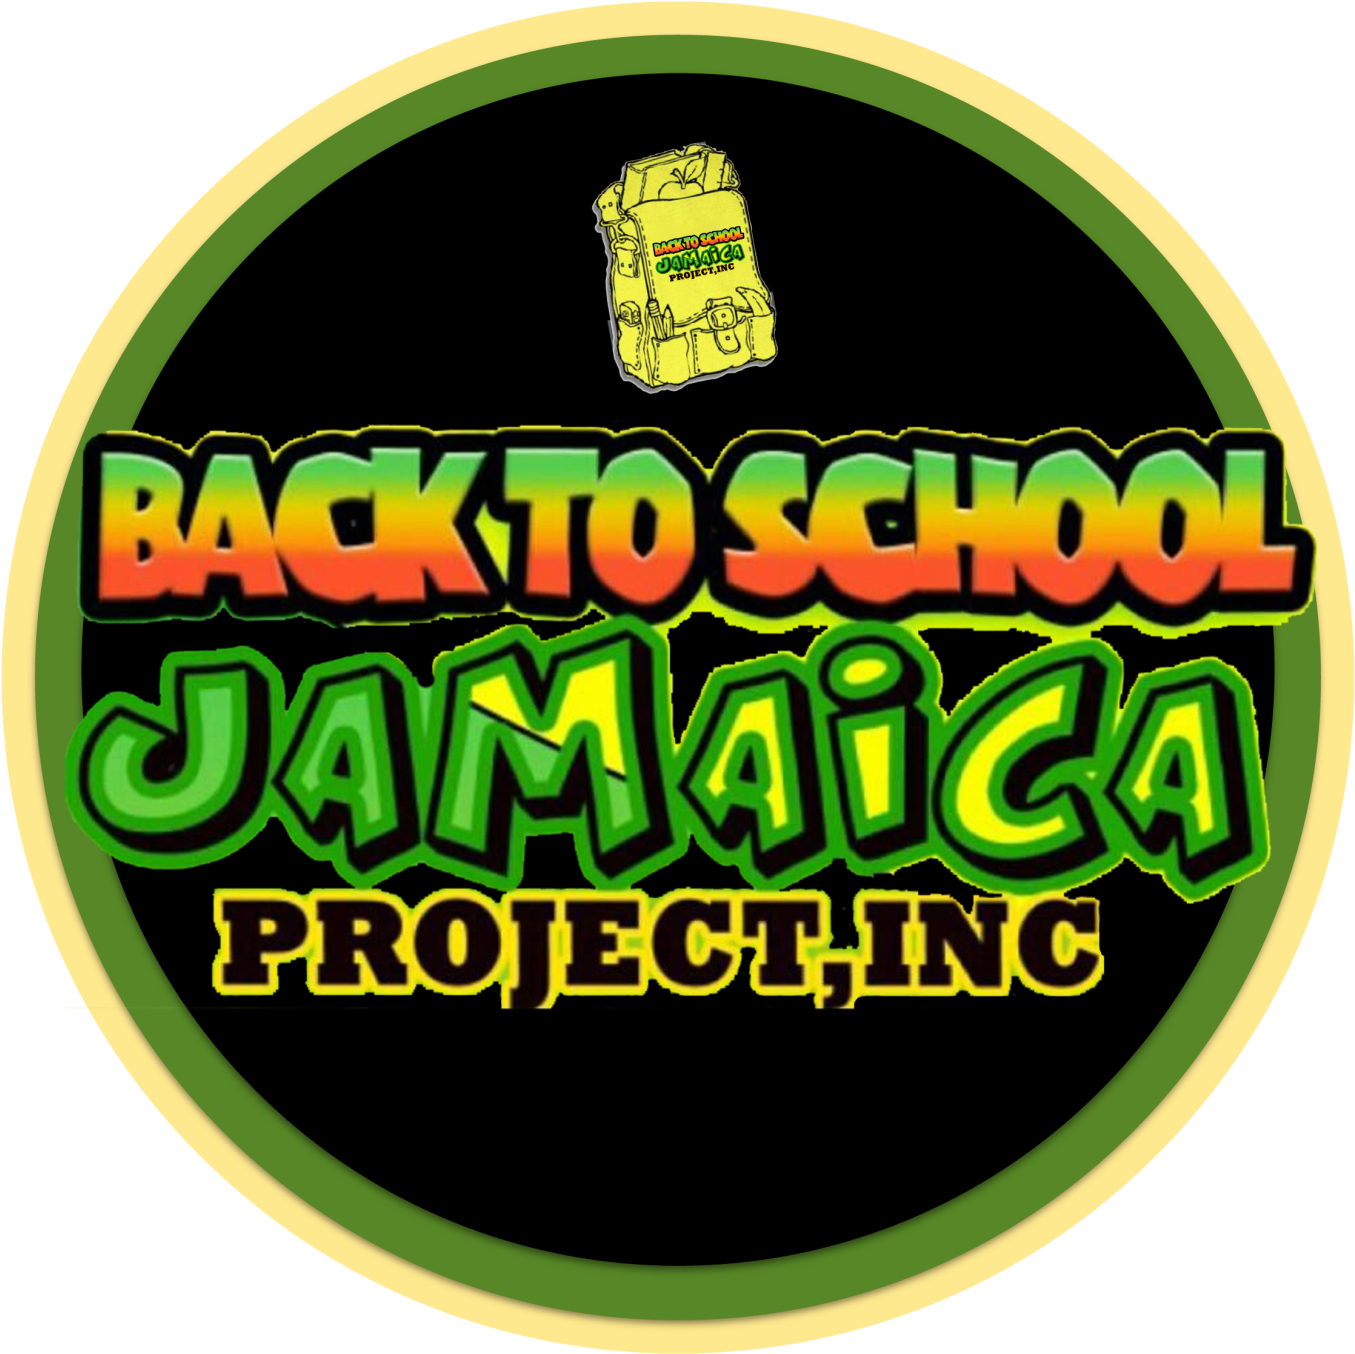 Back To School Jamaica Project Inc - Circle (2000x1545)